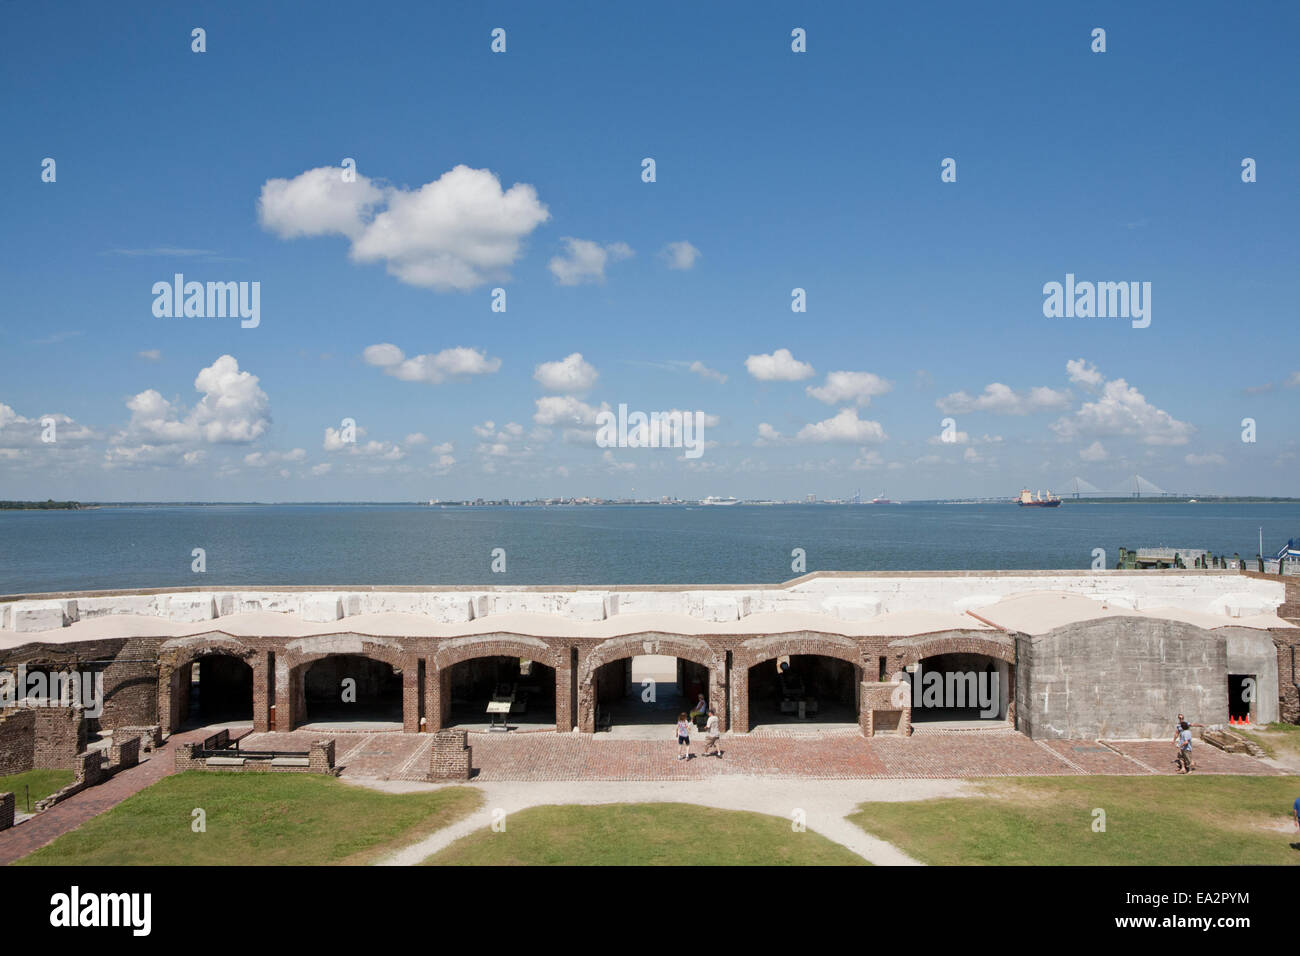 View of Fort Sumter looking towards the parade grounds and Charleston, South Carolina Stock Photo